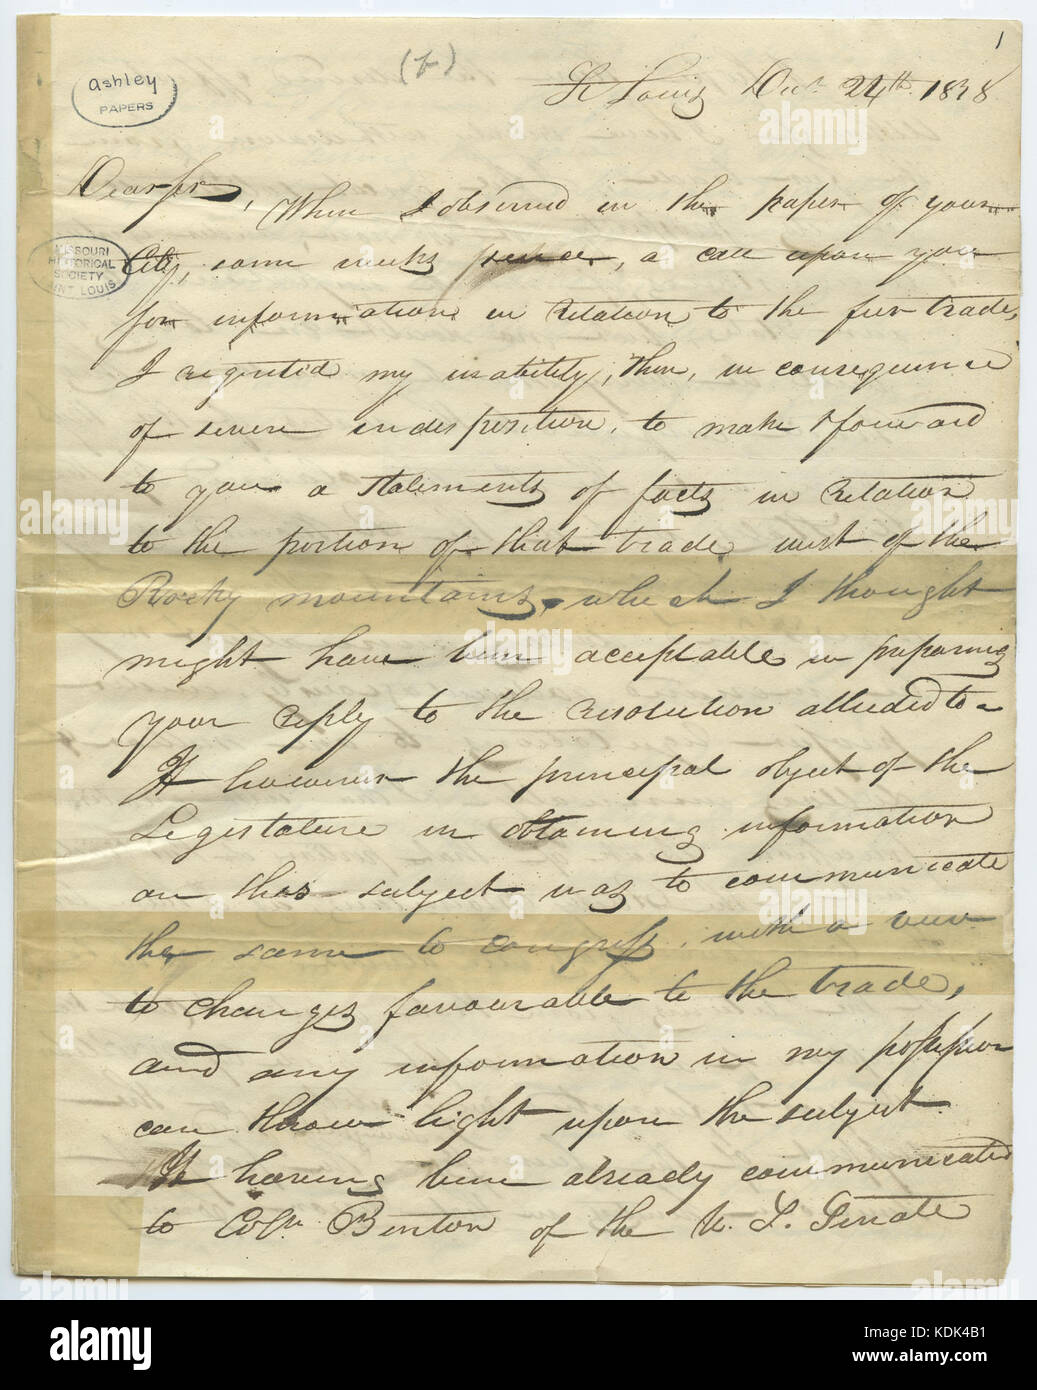 Letter signed William H. Ashley, St. Louis, to dear sir, October 24, 1828 Stock Photo